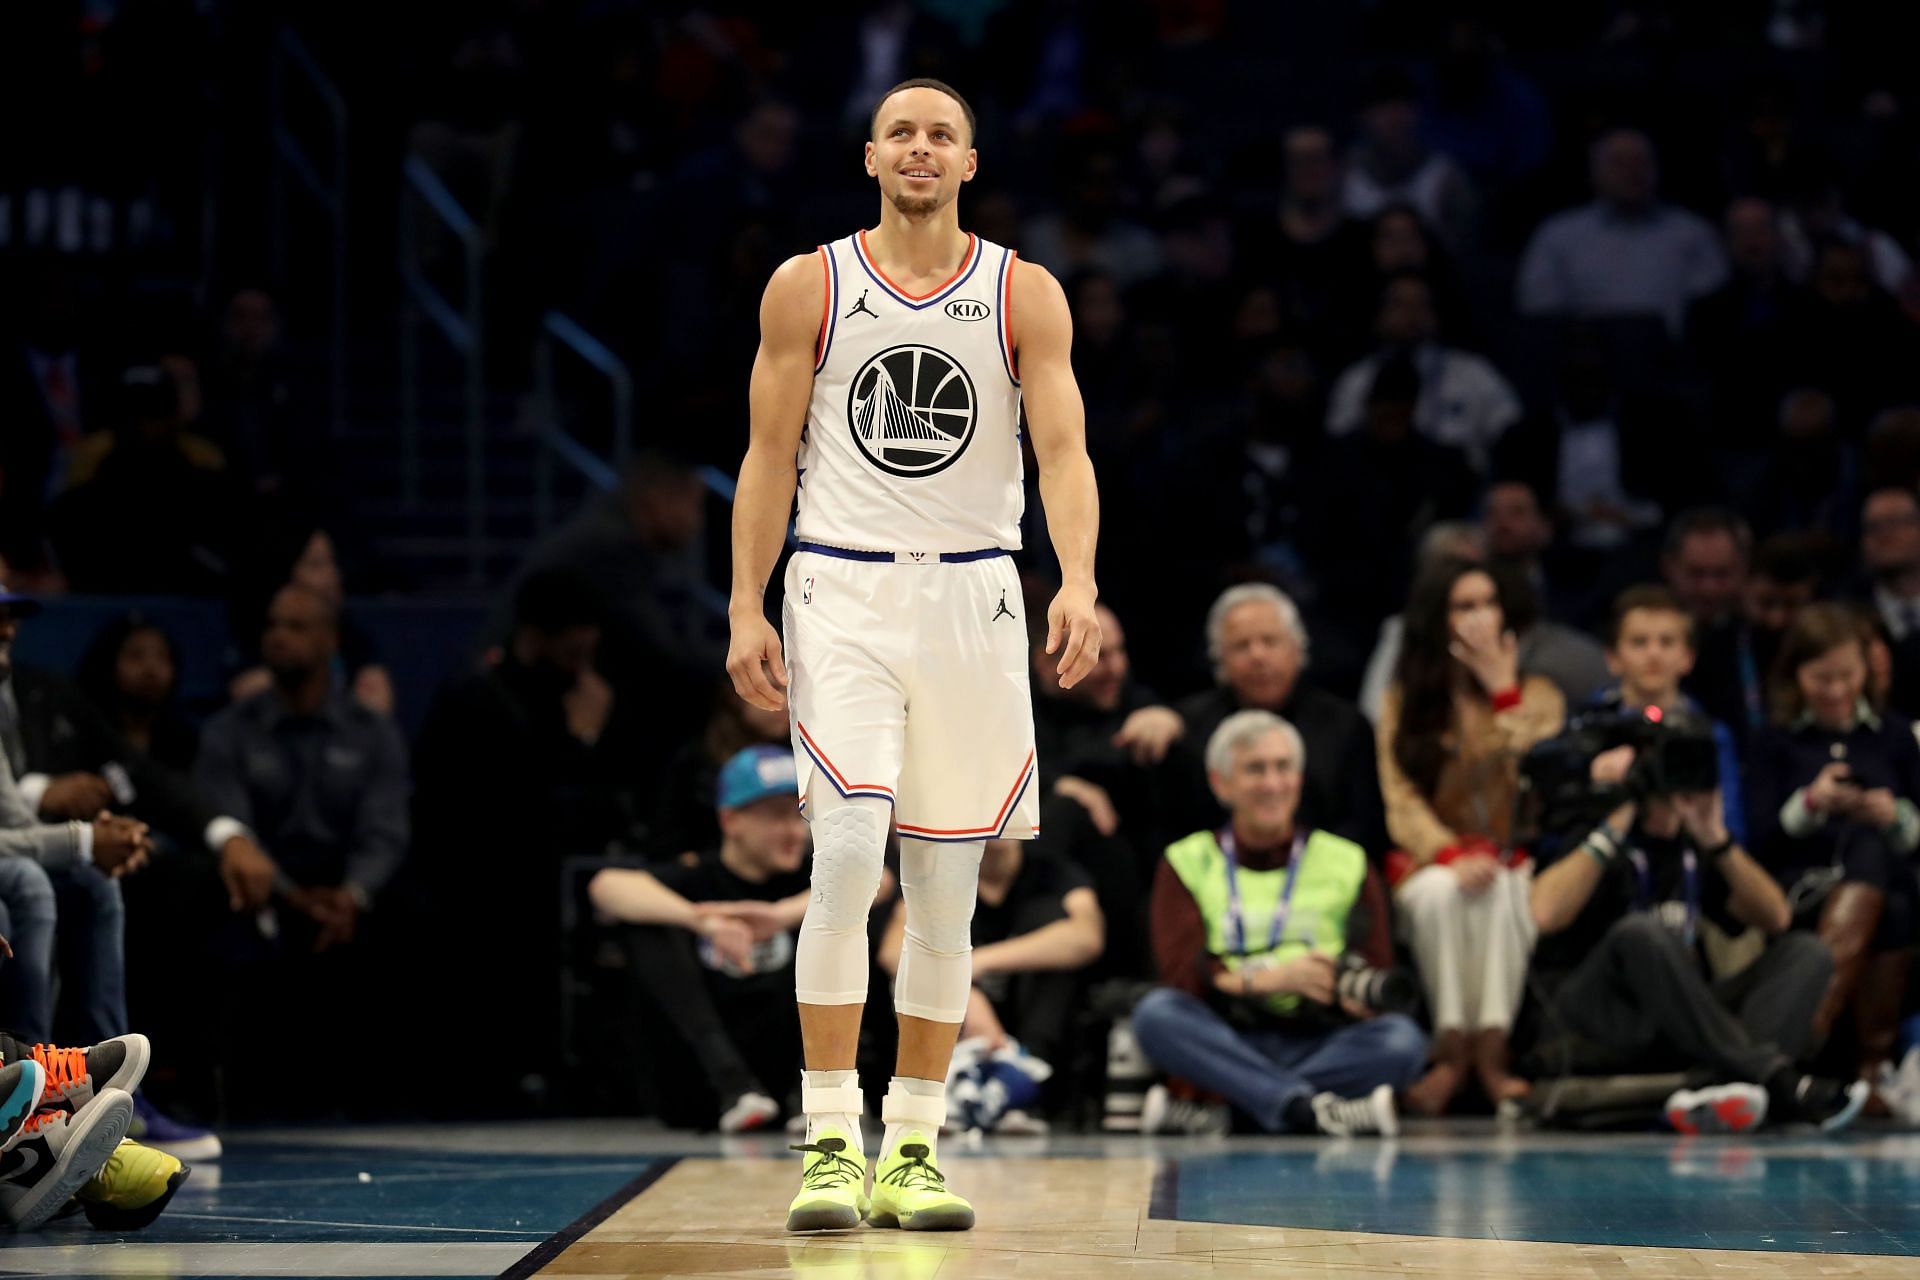 Steph Curry of the Golden State Warriors at the 2019 NBA All-Star Game